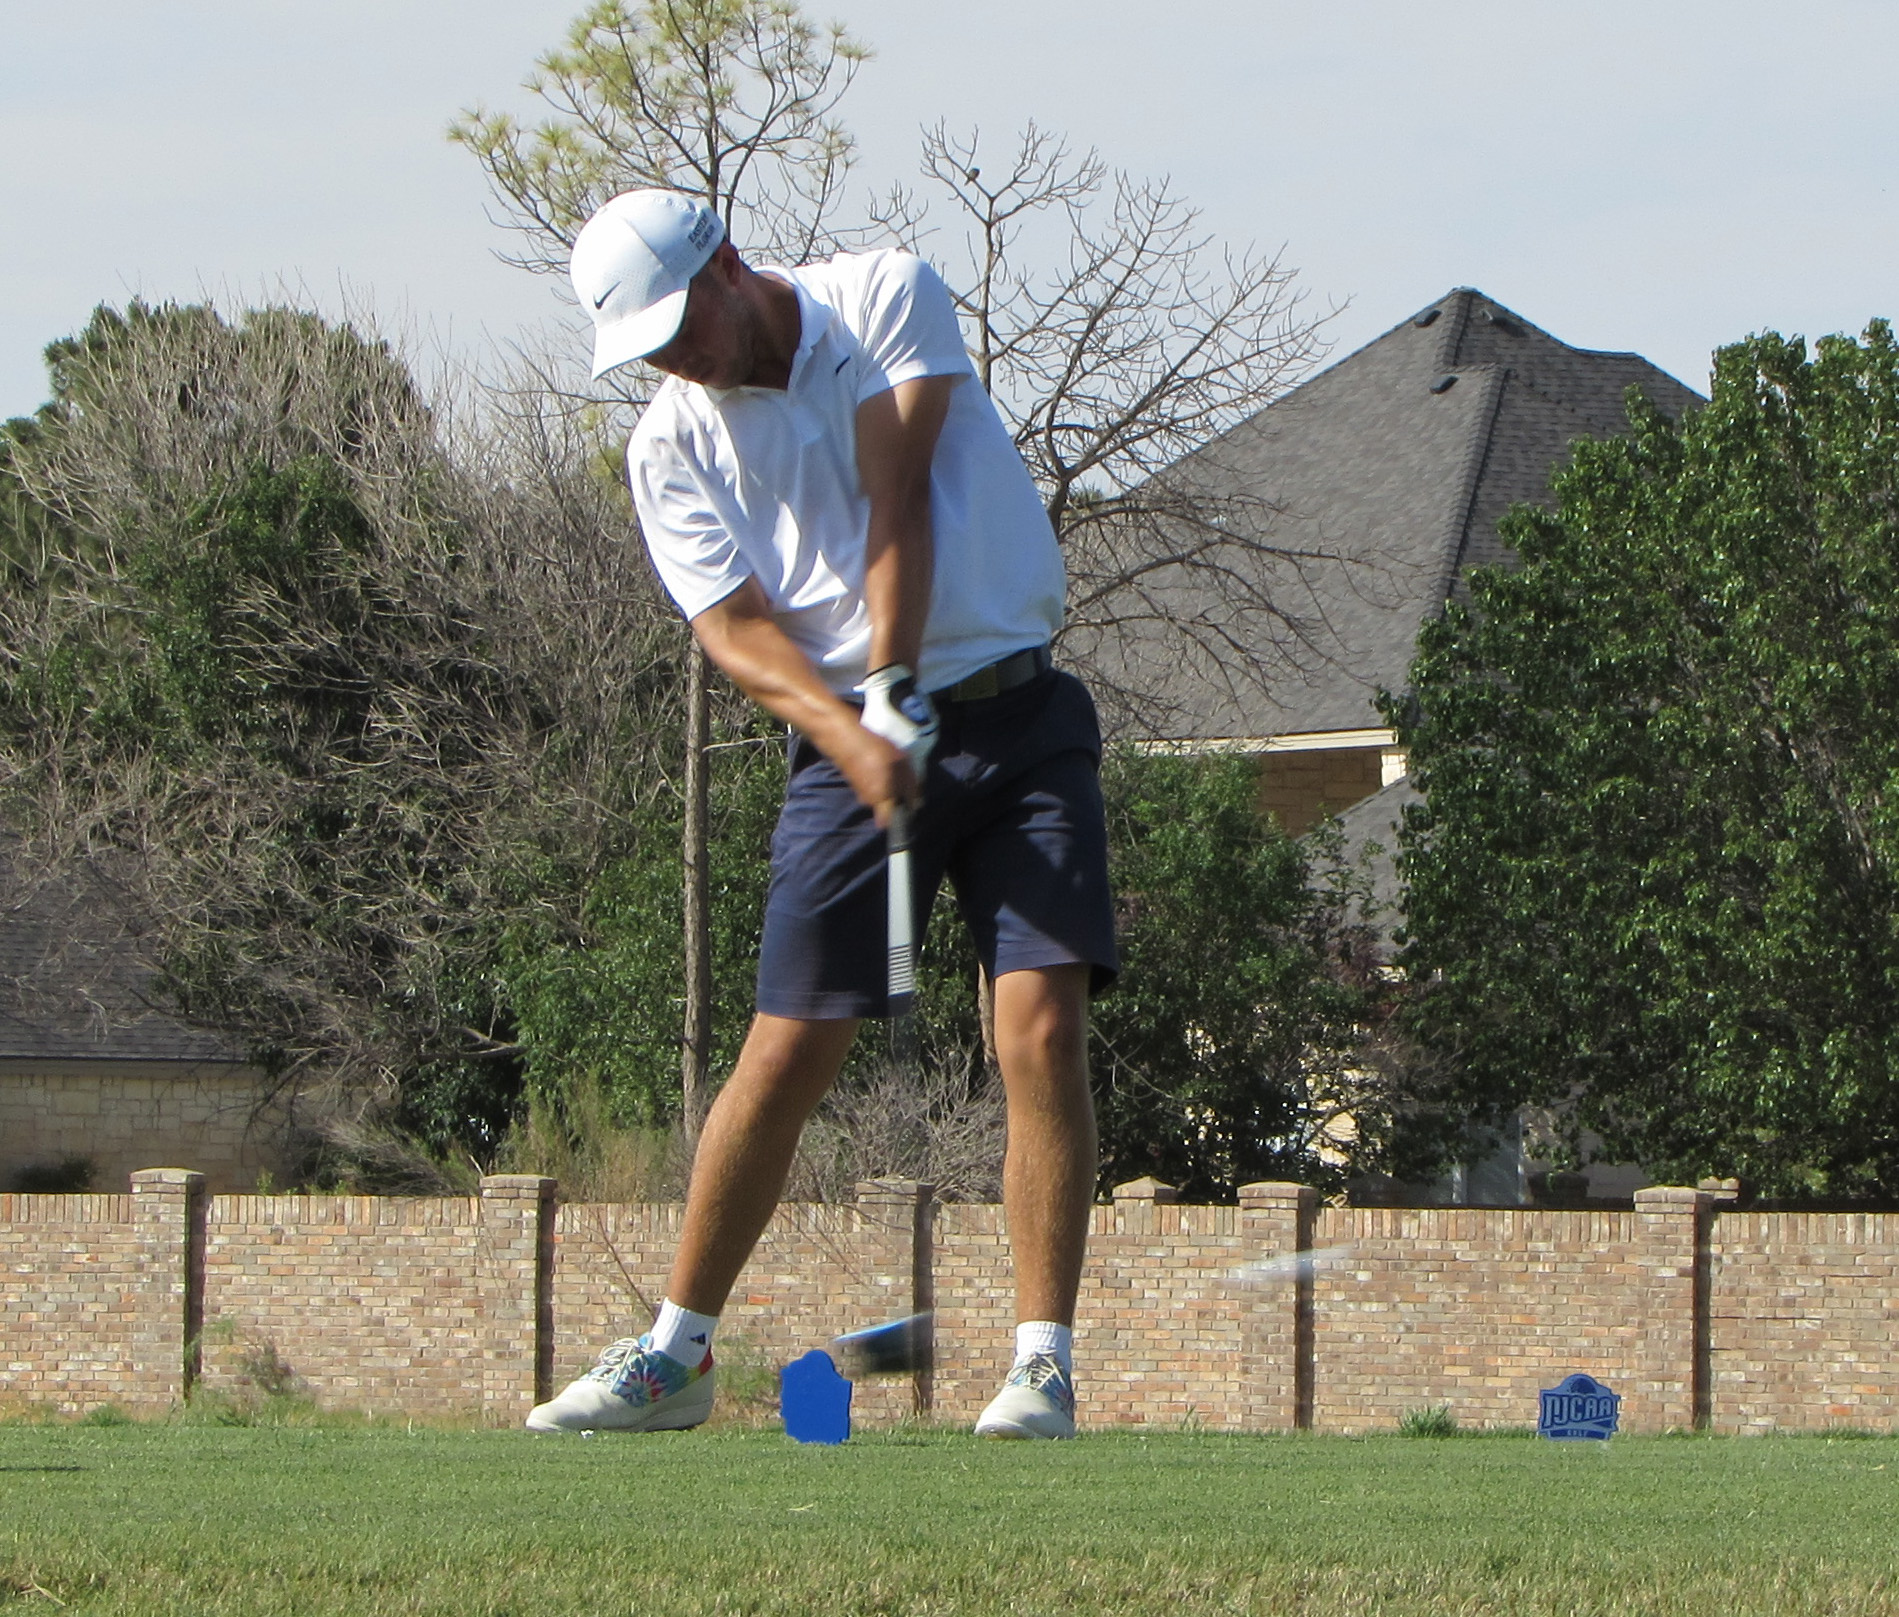 Men's golf team in third place heading into final round of national tournament